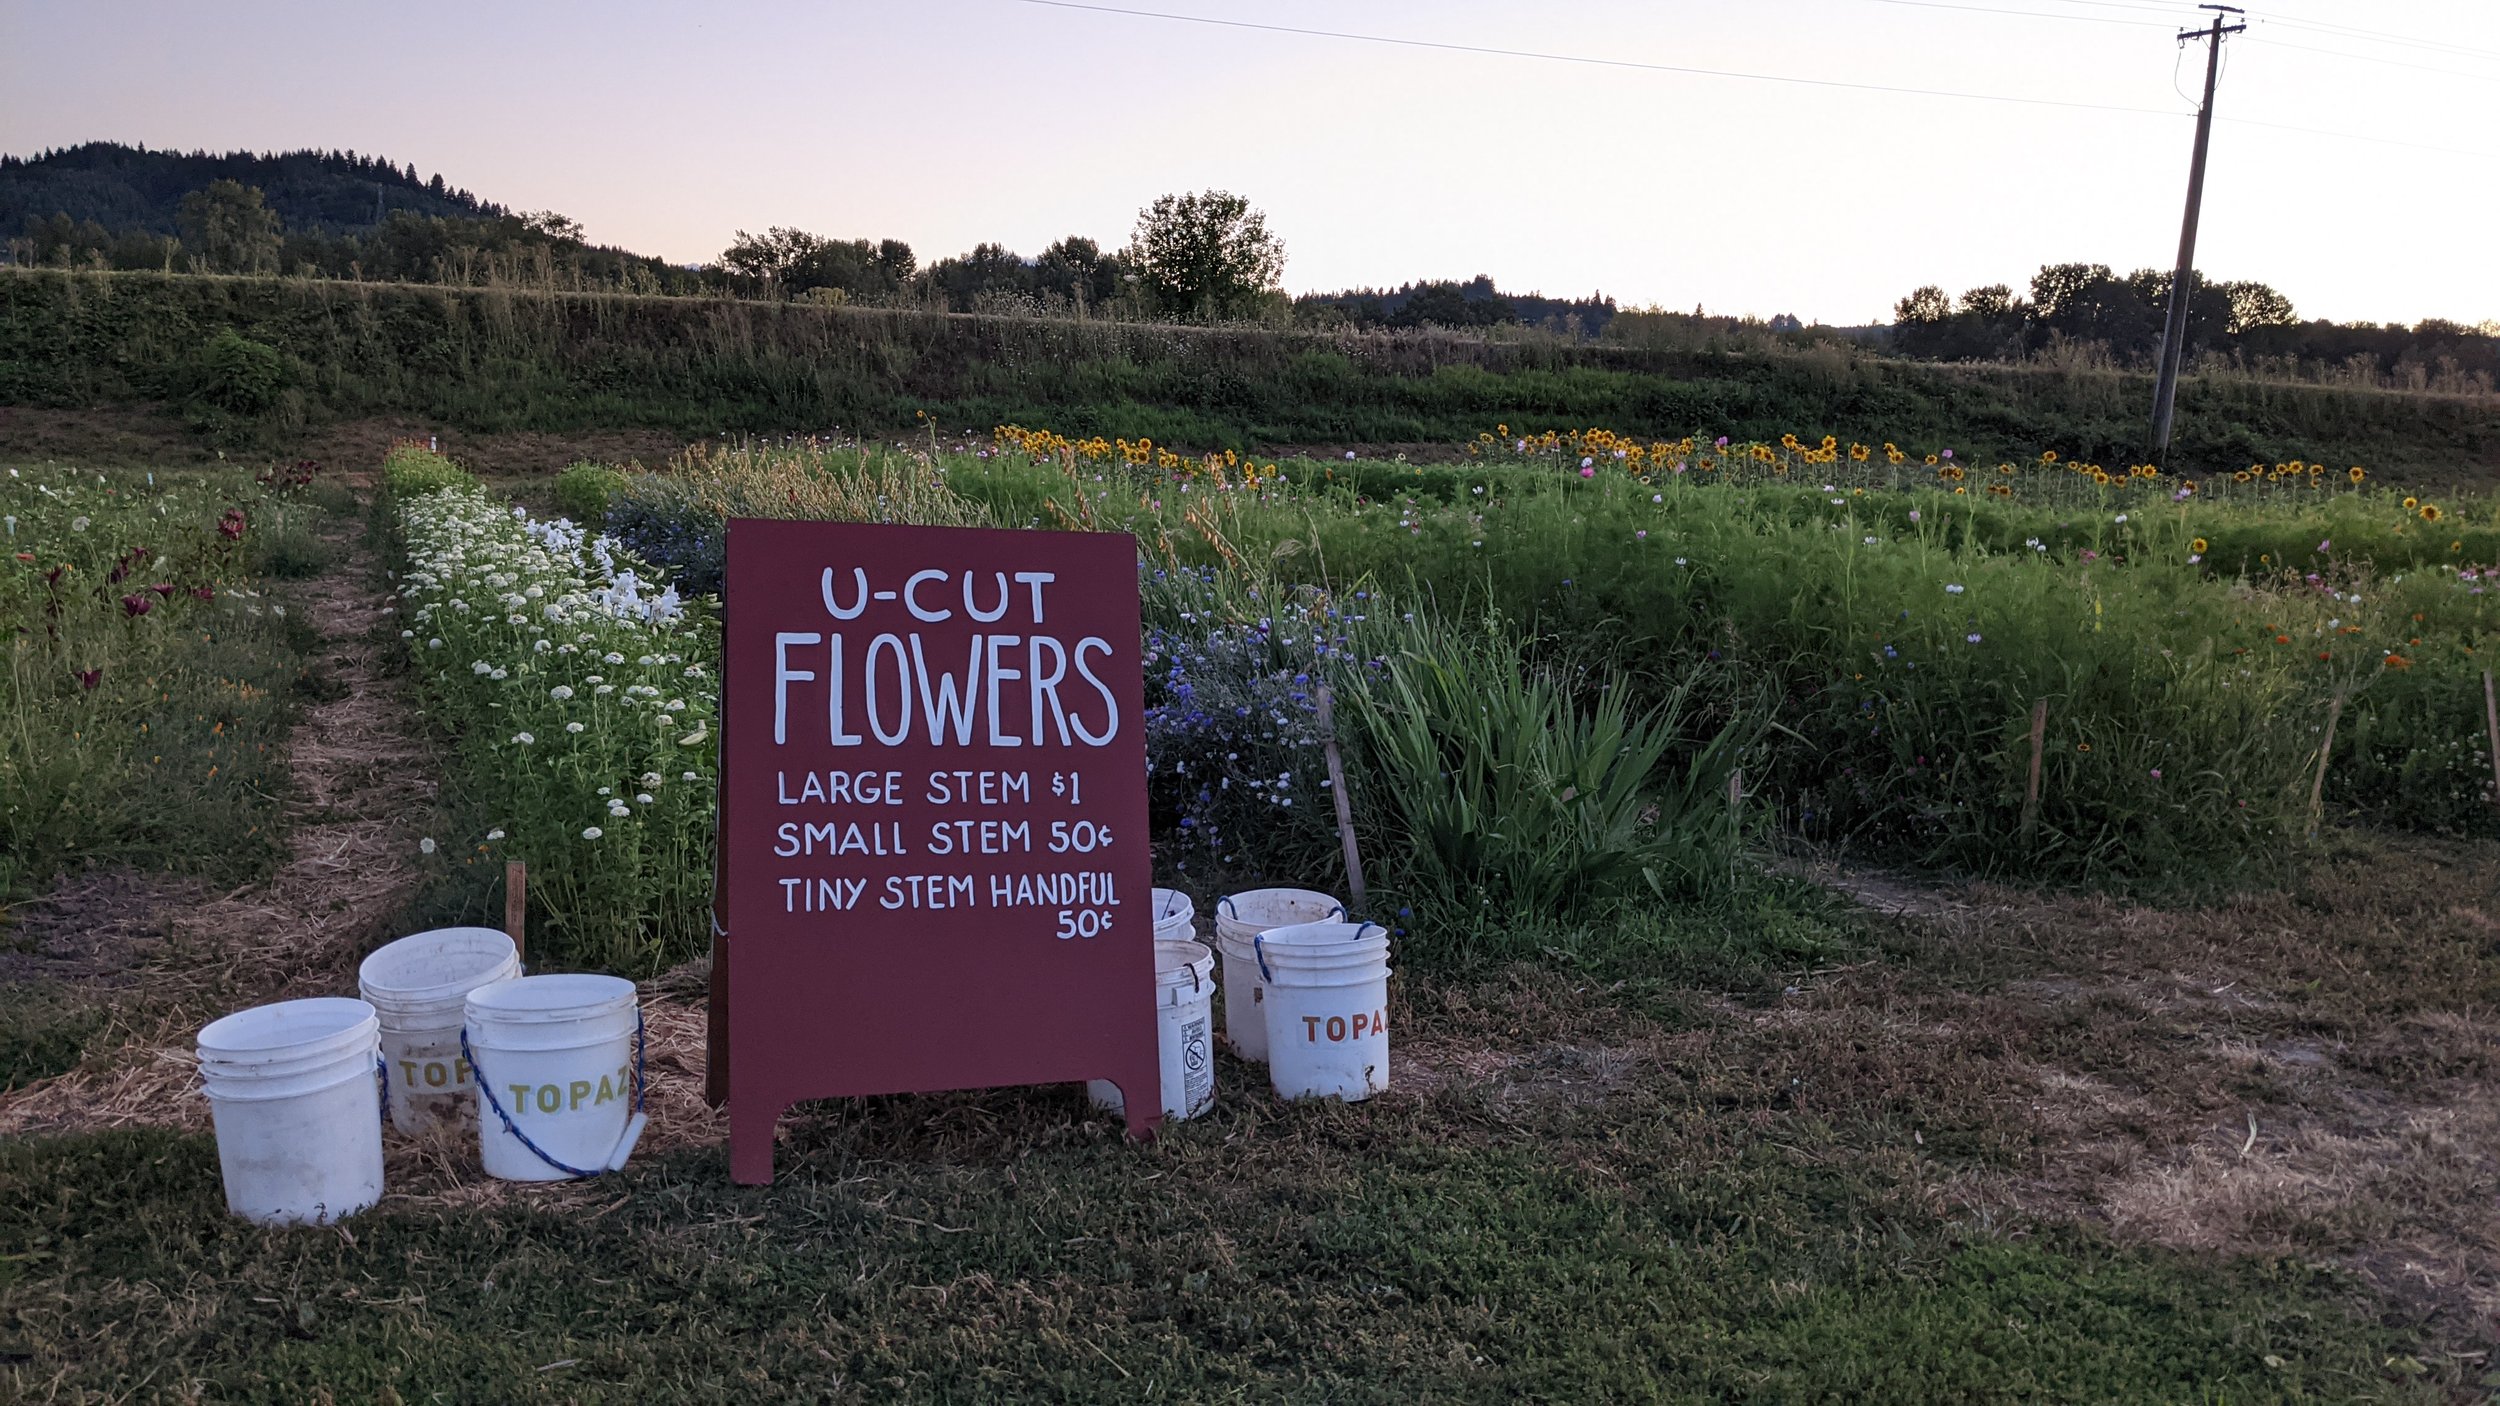  Our U-Cut flowers were so beautiful growing in front of the market. But the ground is so full of horsetail and sledge that it costs more to weed the area than we make selling all the flowers. Because we don’t use any pesticides - even on our flowers